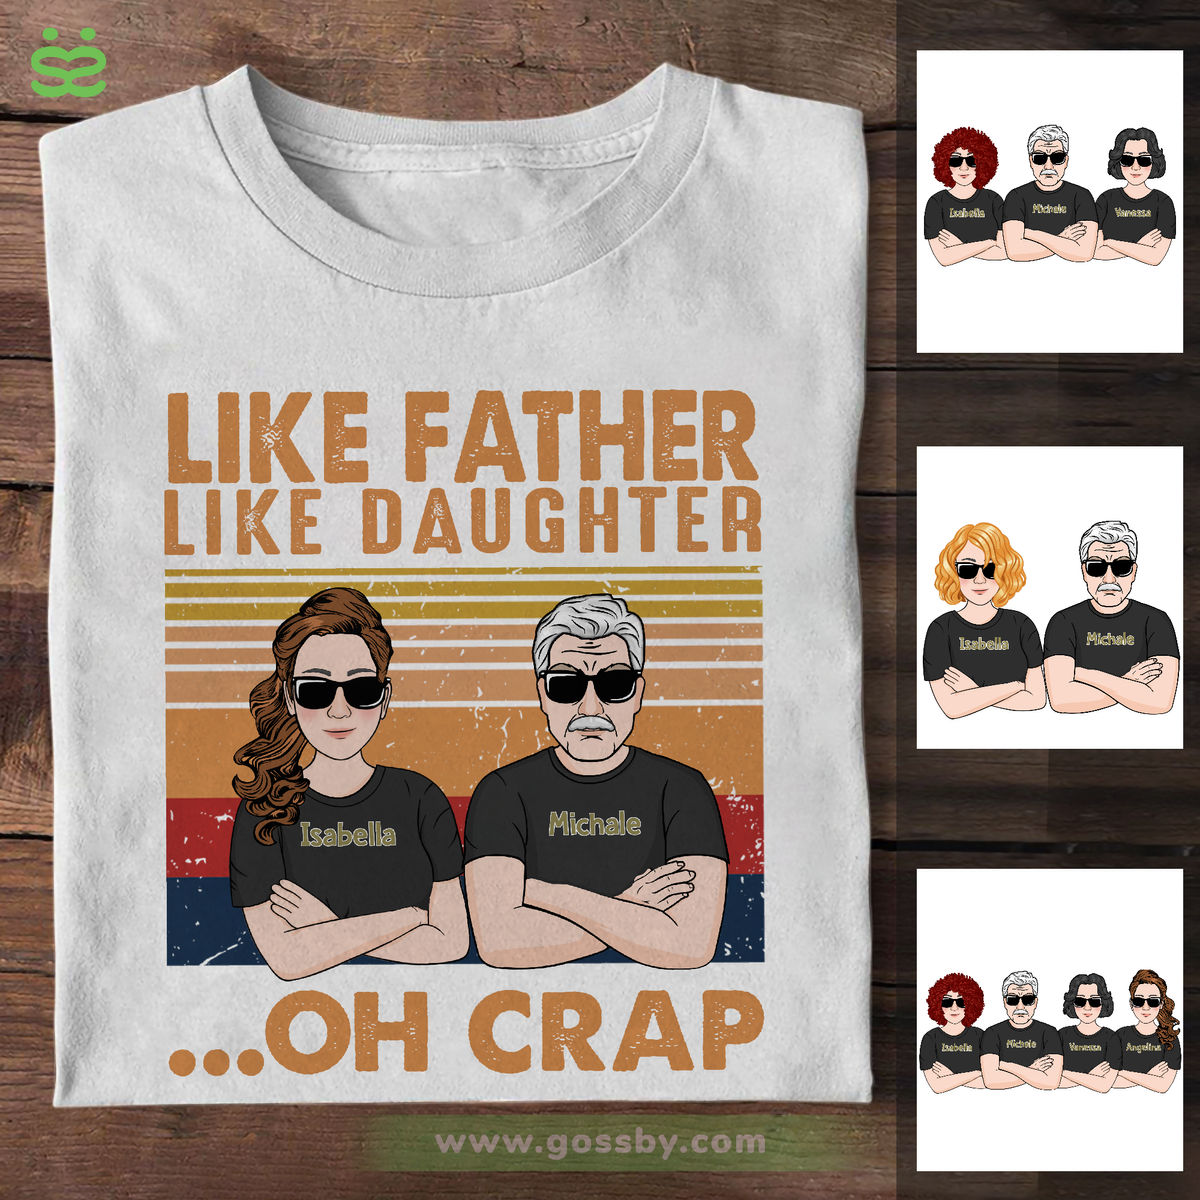 Personalized Shirt - Father and Daughters - Like Father Like Daughter ... Oh Crap - 1D - White Shirt Ver 1